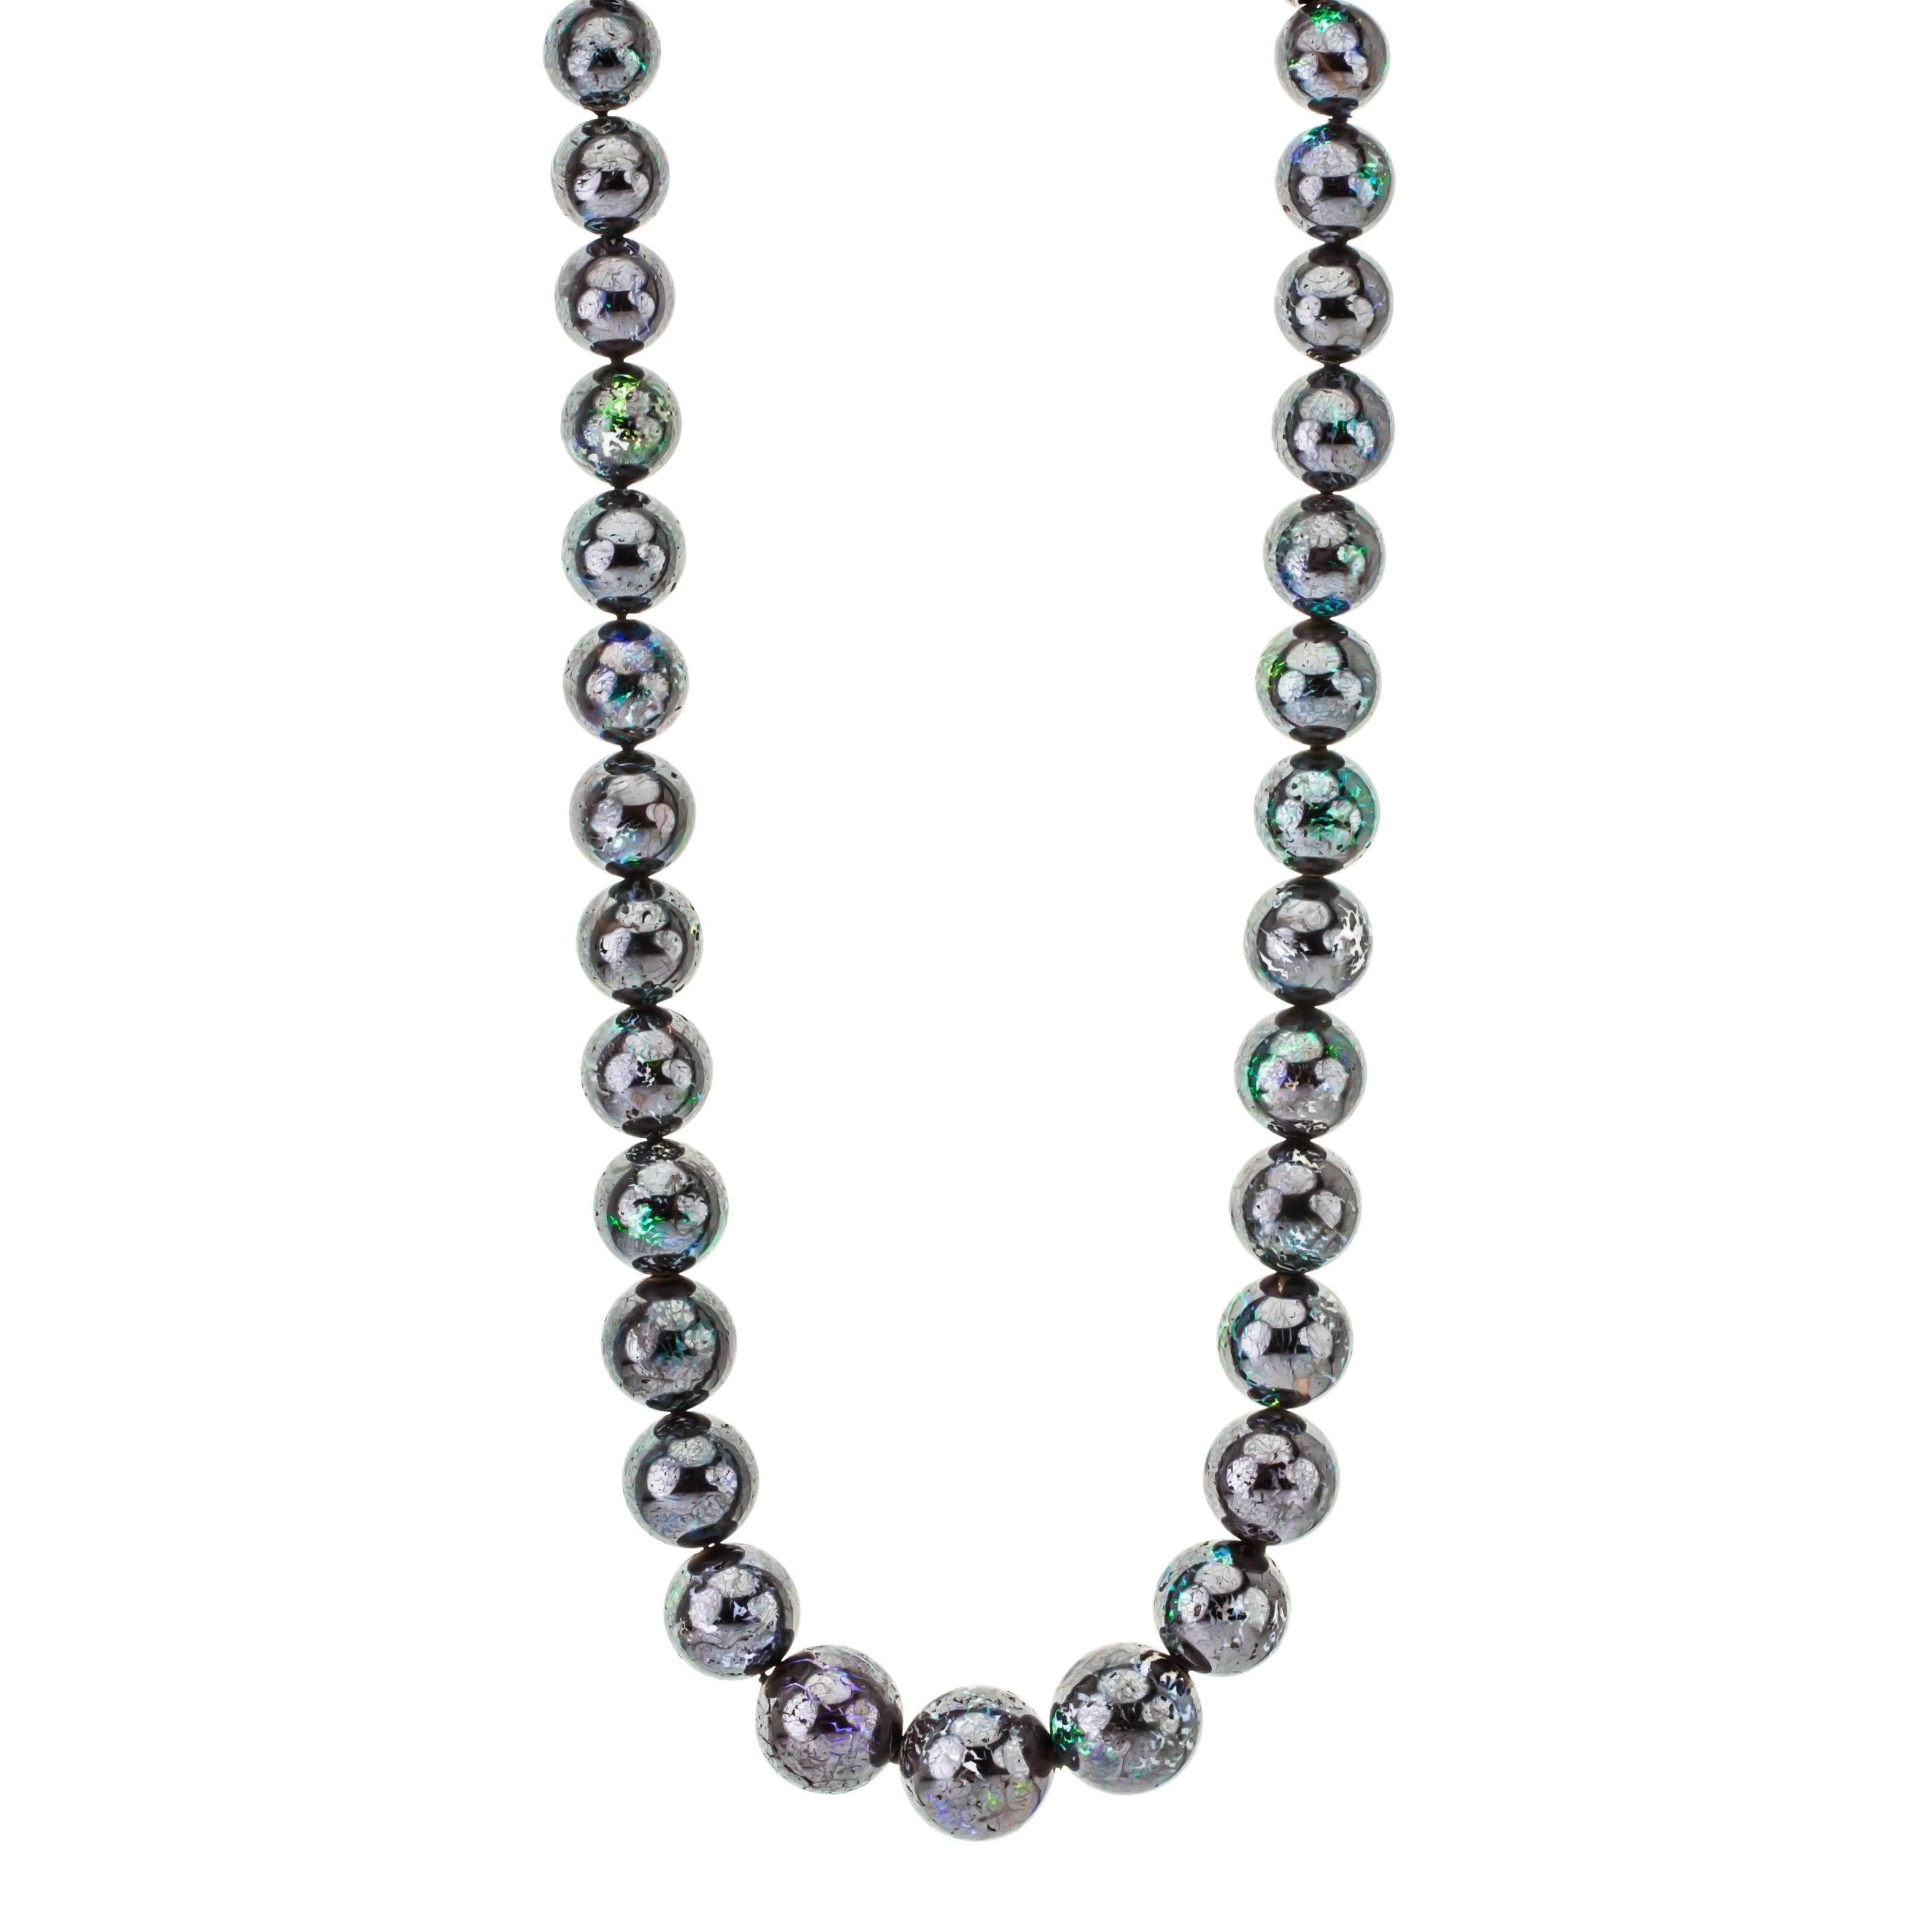 This unique design opal necklace showcases 35 boulder opals. Hand-crafted in 14K white gold. Handmade in Richardson, TX.